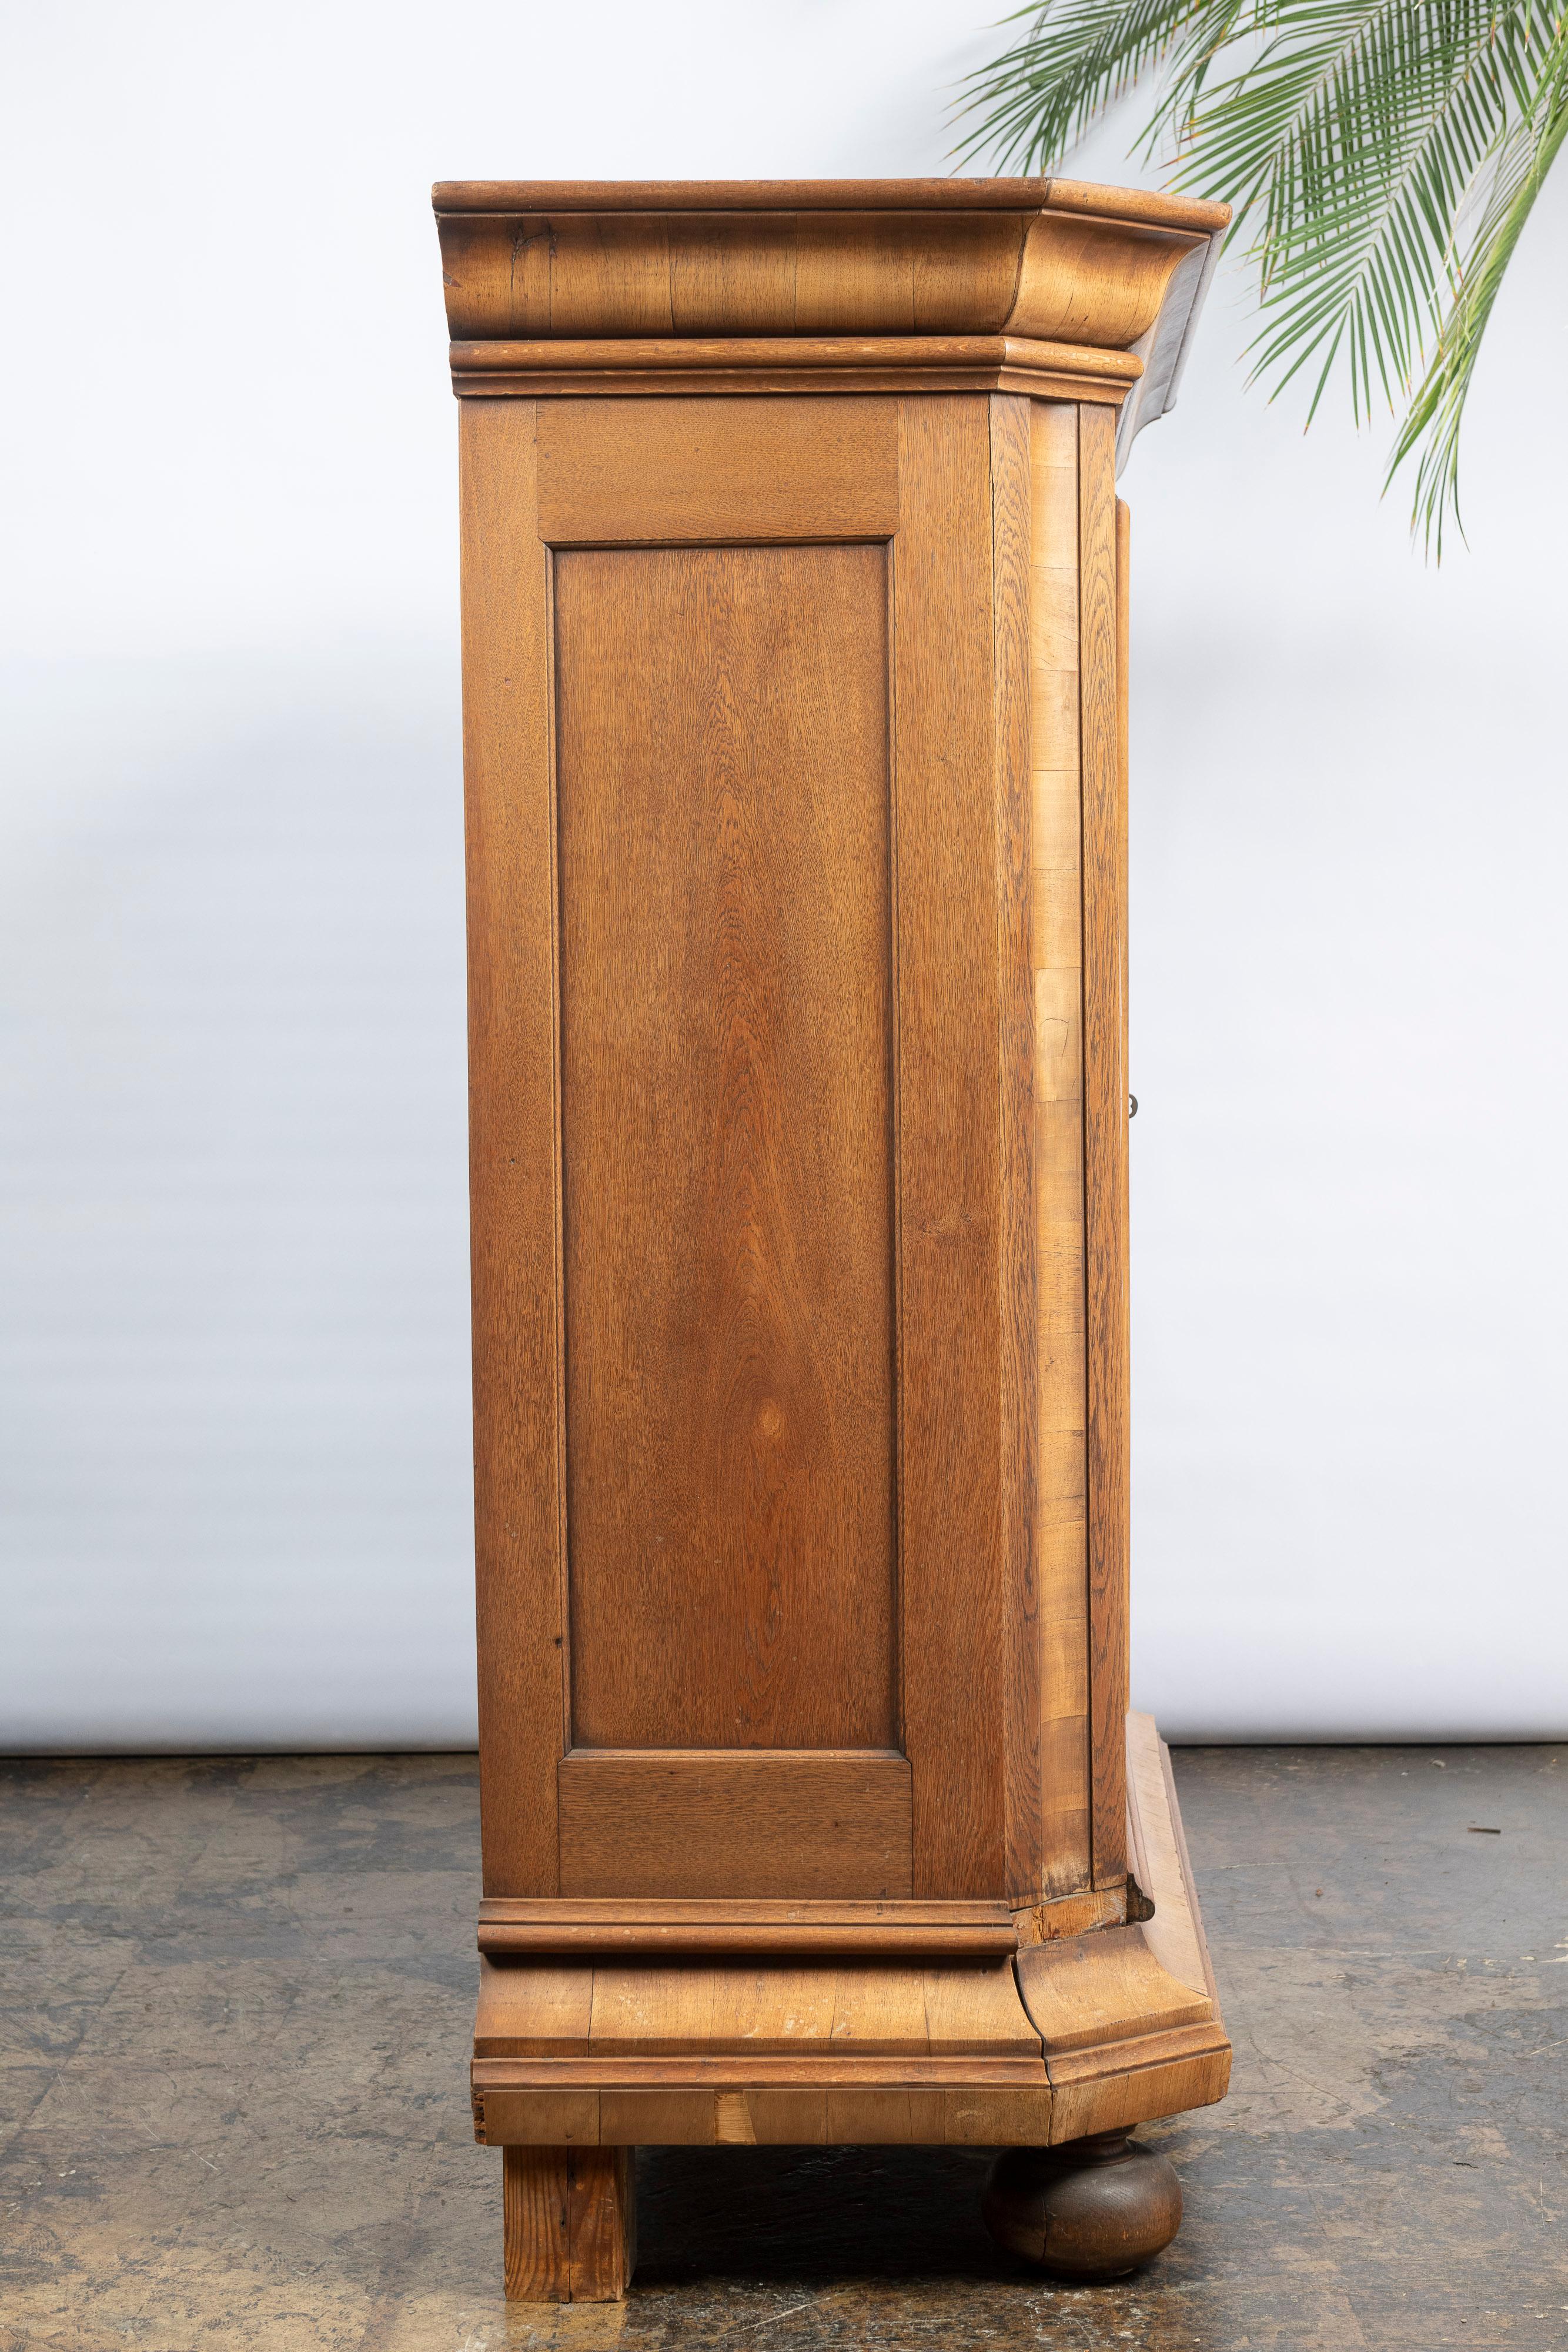 English Antique Oak Wardrobe with Corrugated Wood Doors, Shelves and Key In Good Condition For Sale In San Francisco, CA